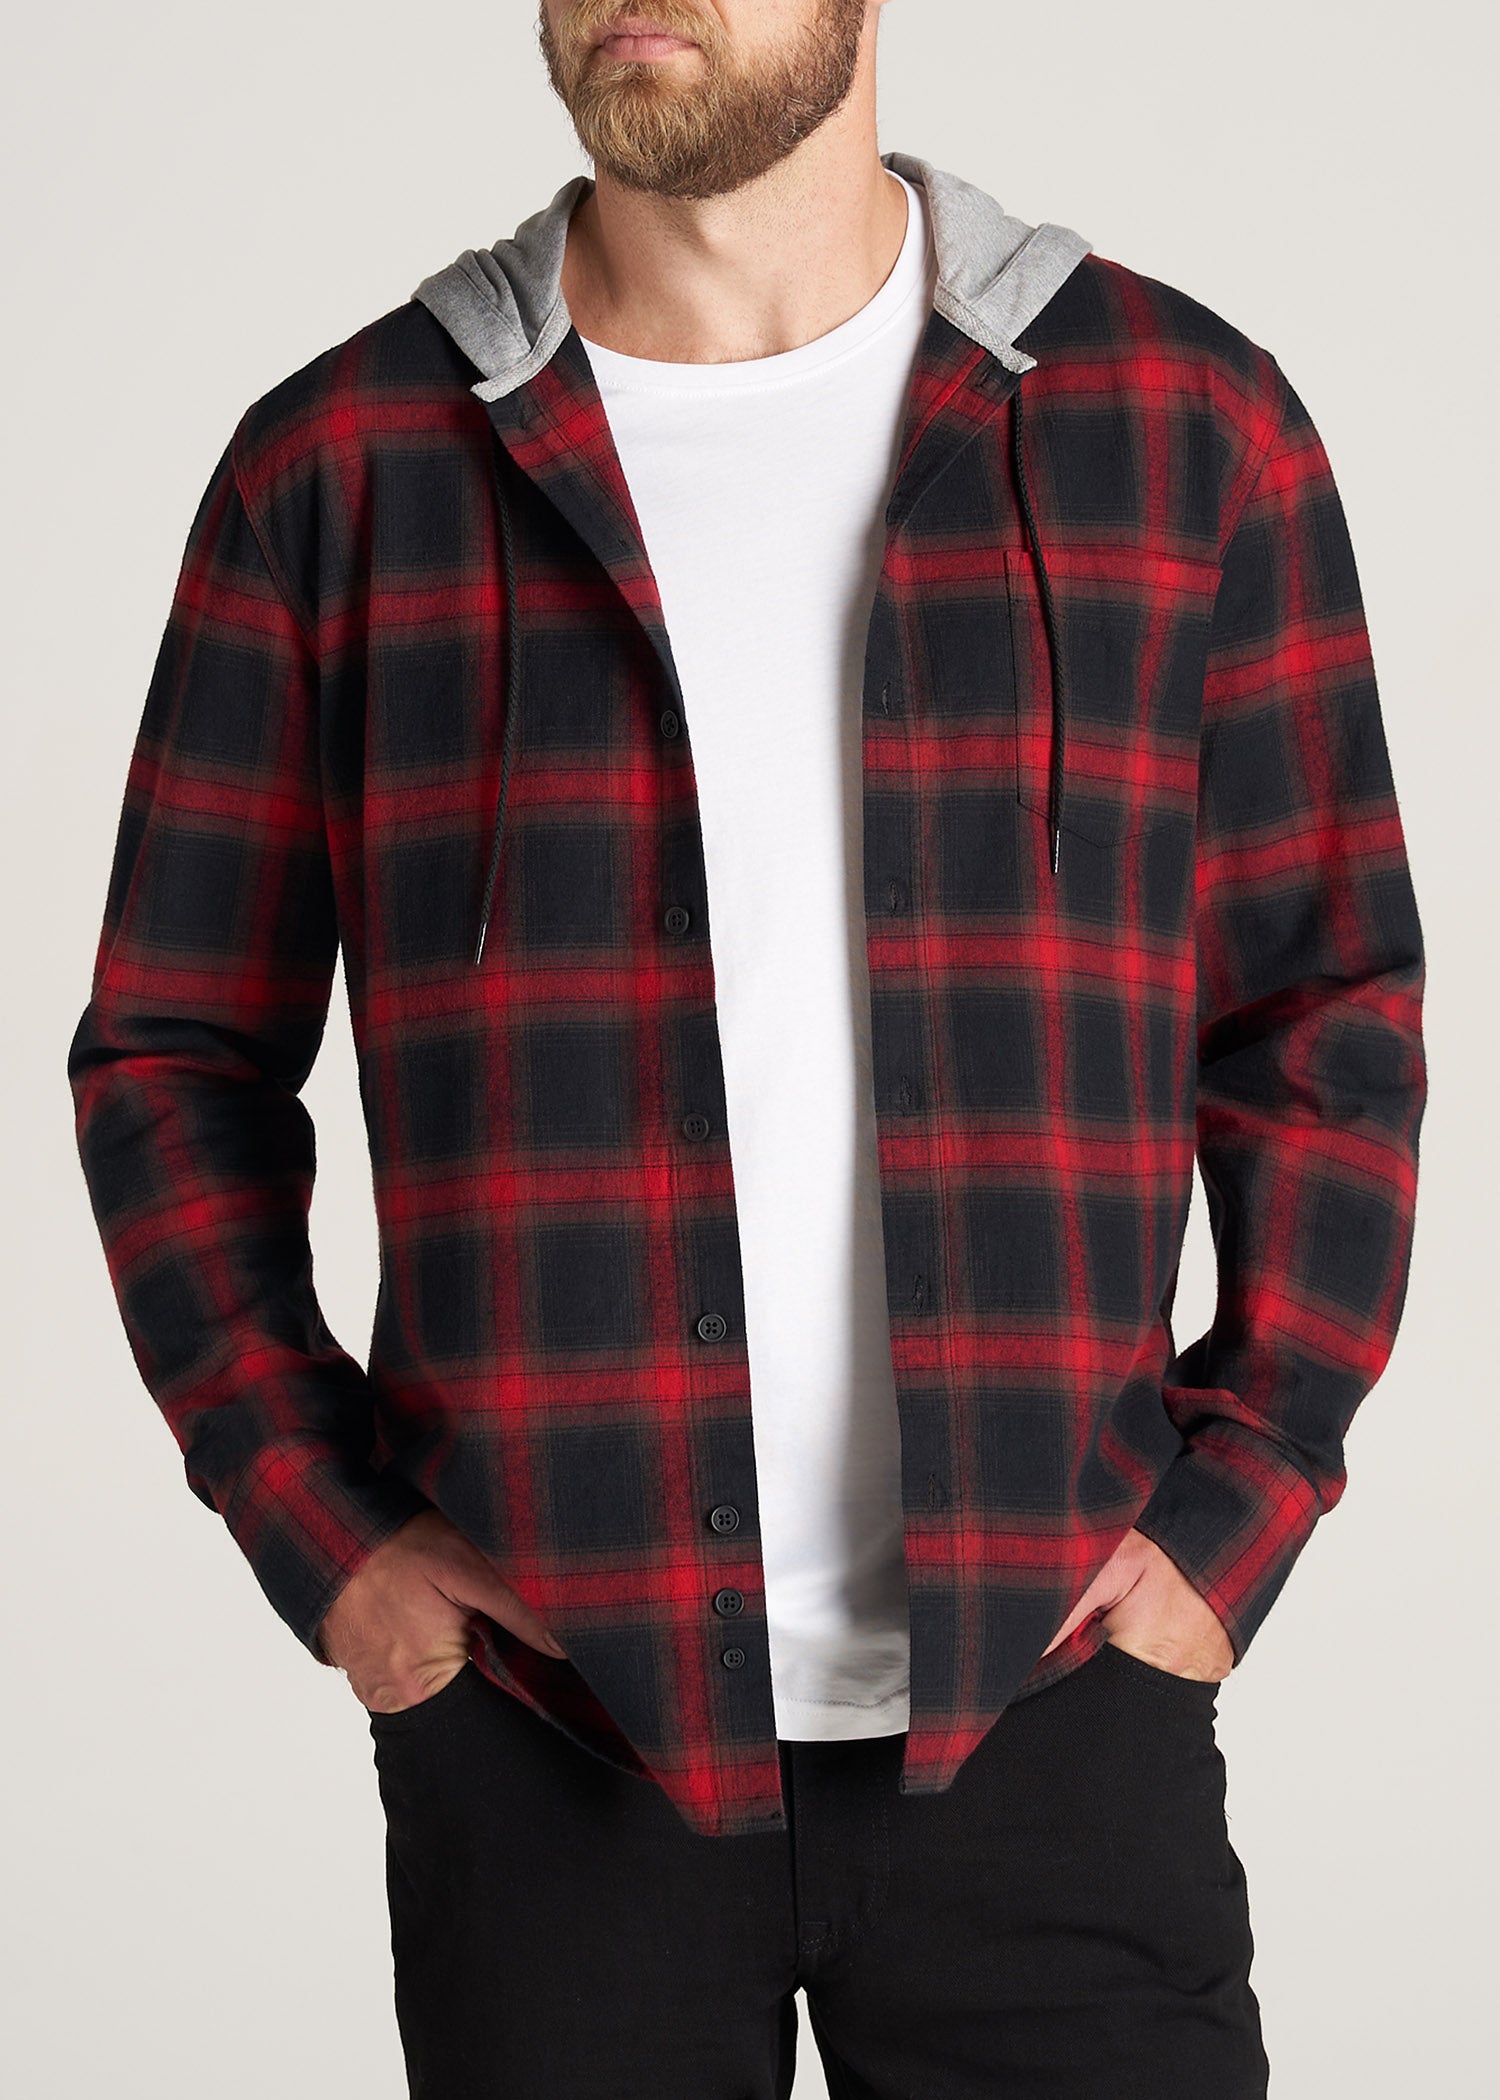 LJ&S Men's Tall Hooded Flannel Shirt in Black & Red Plaid – American Tall